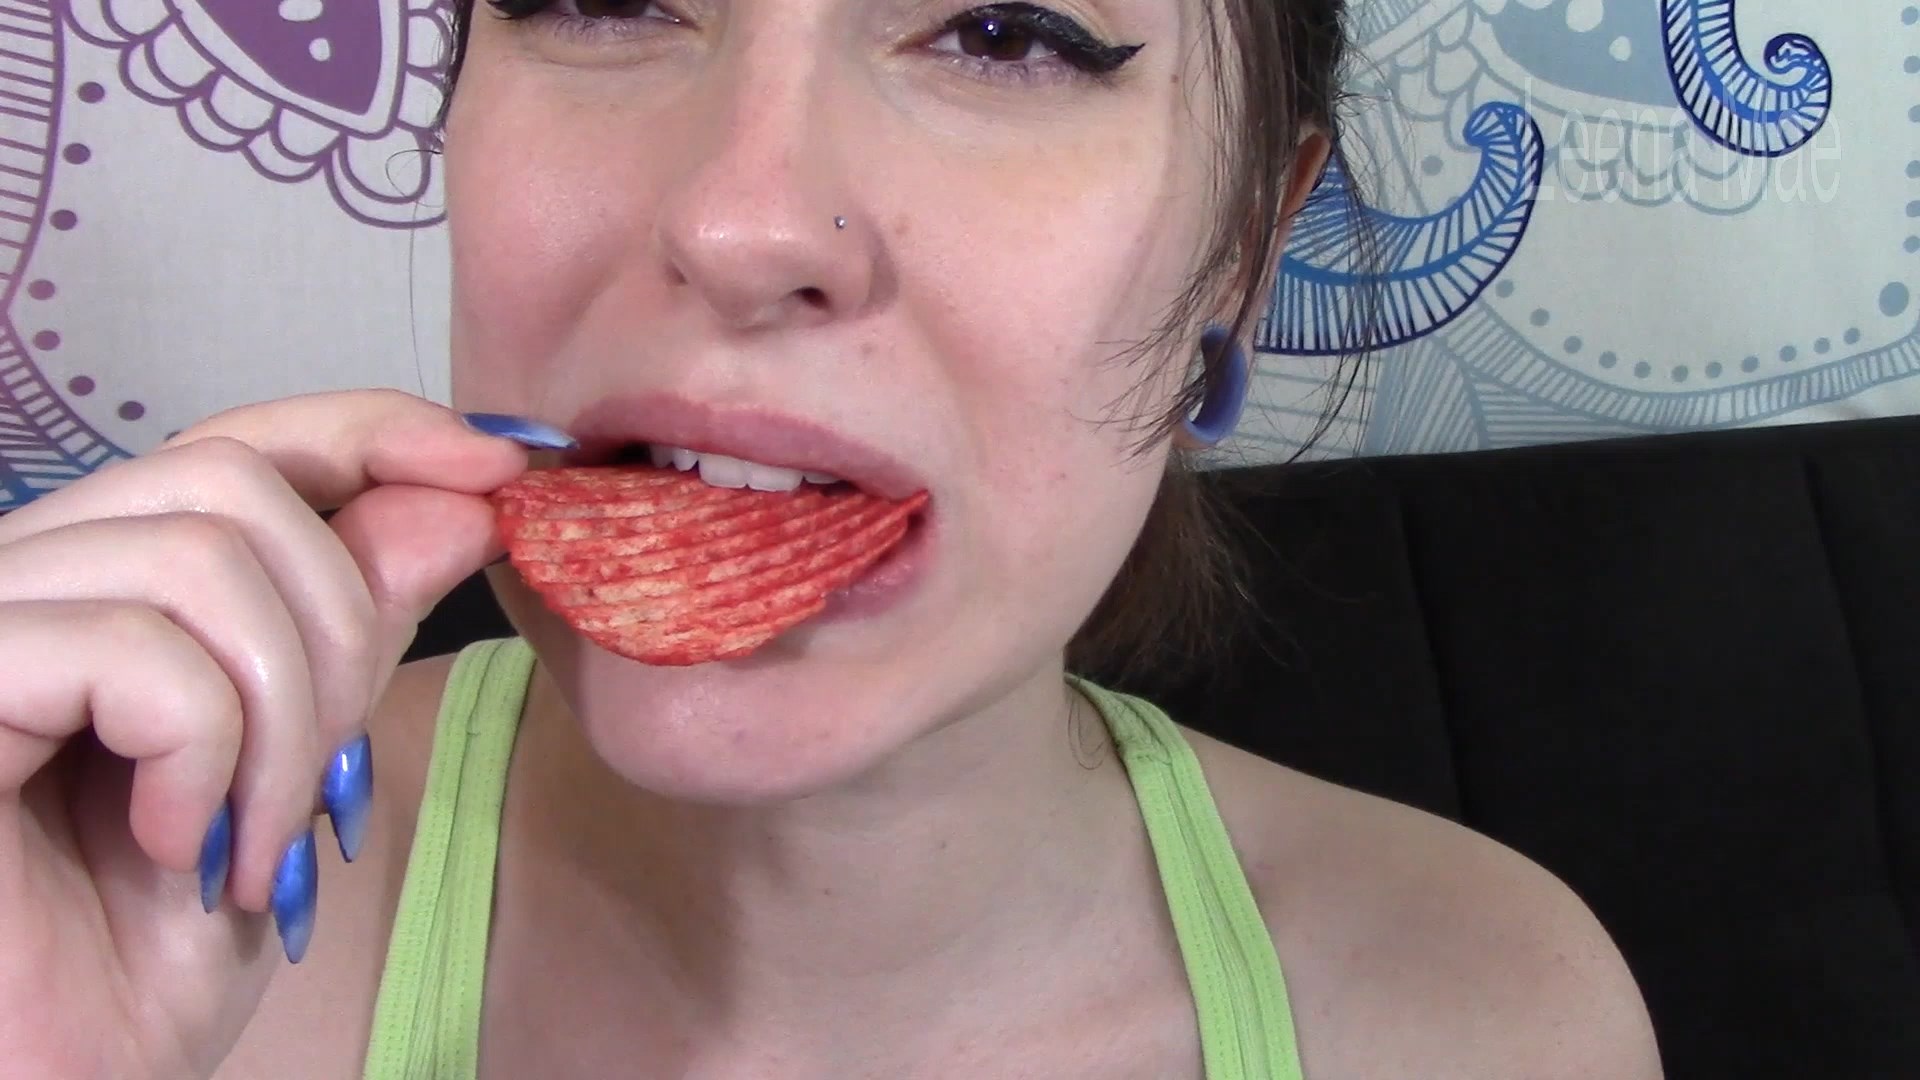 Leena Mae - ASMR Chewing Crunchy Chips and Crinkling 1080p